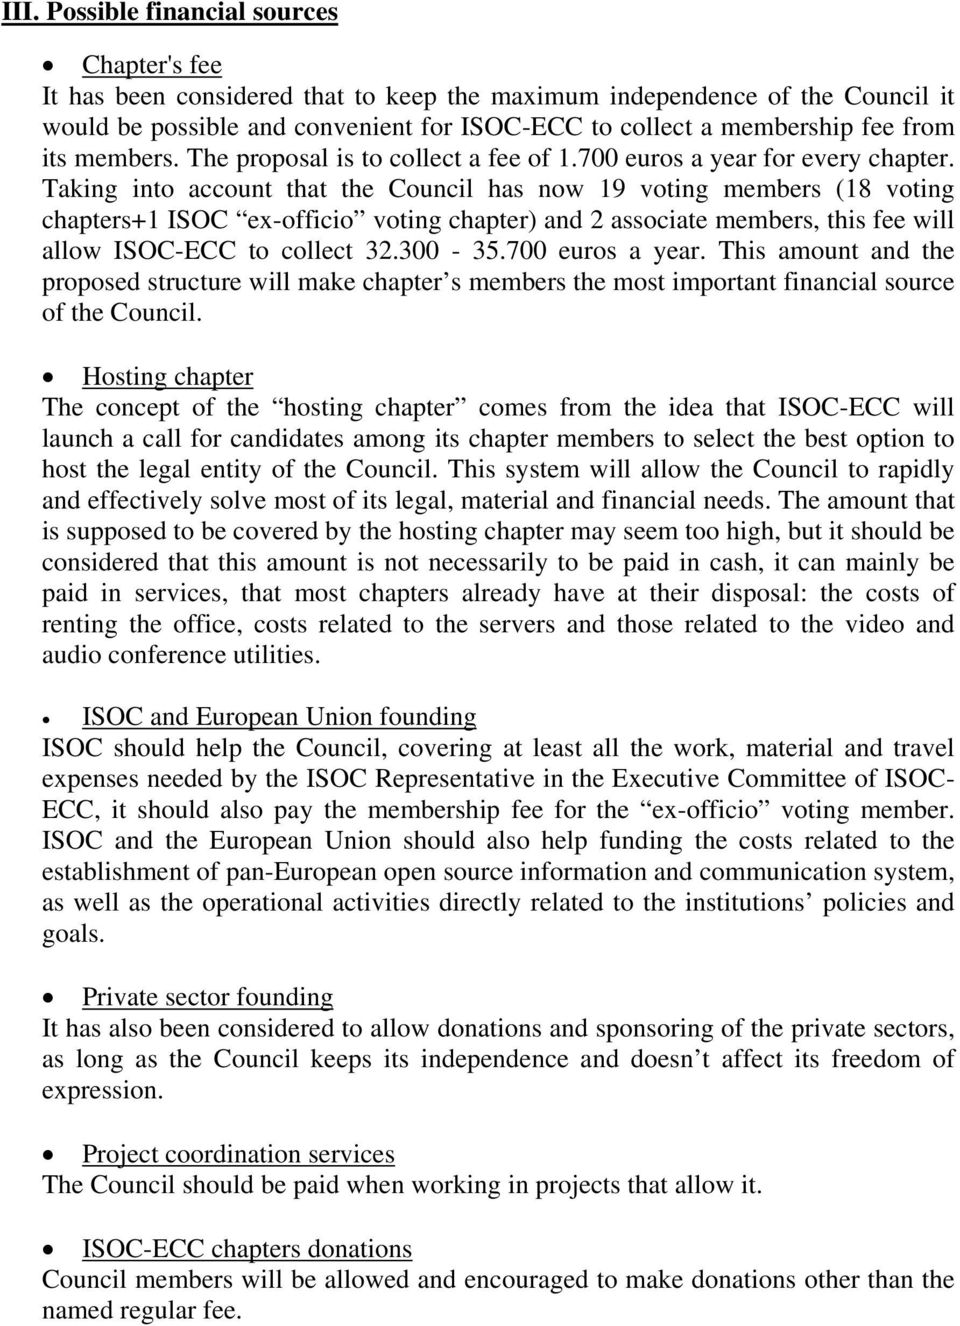 Taking into account that the Council has now 19 voting members (18 voting chapters+1 ISOC ex-officio voting chapter) and 2 associate members, this fee will allow ISOC-ECC to collect 32.300-35.